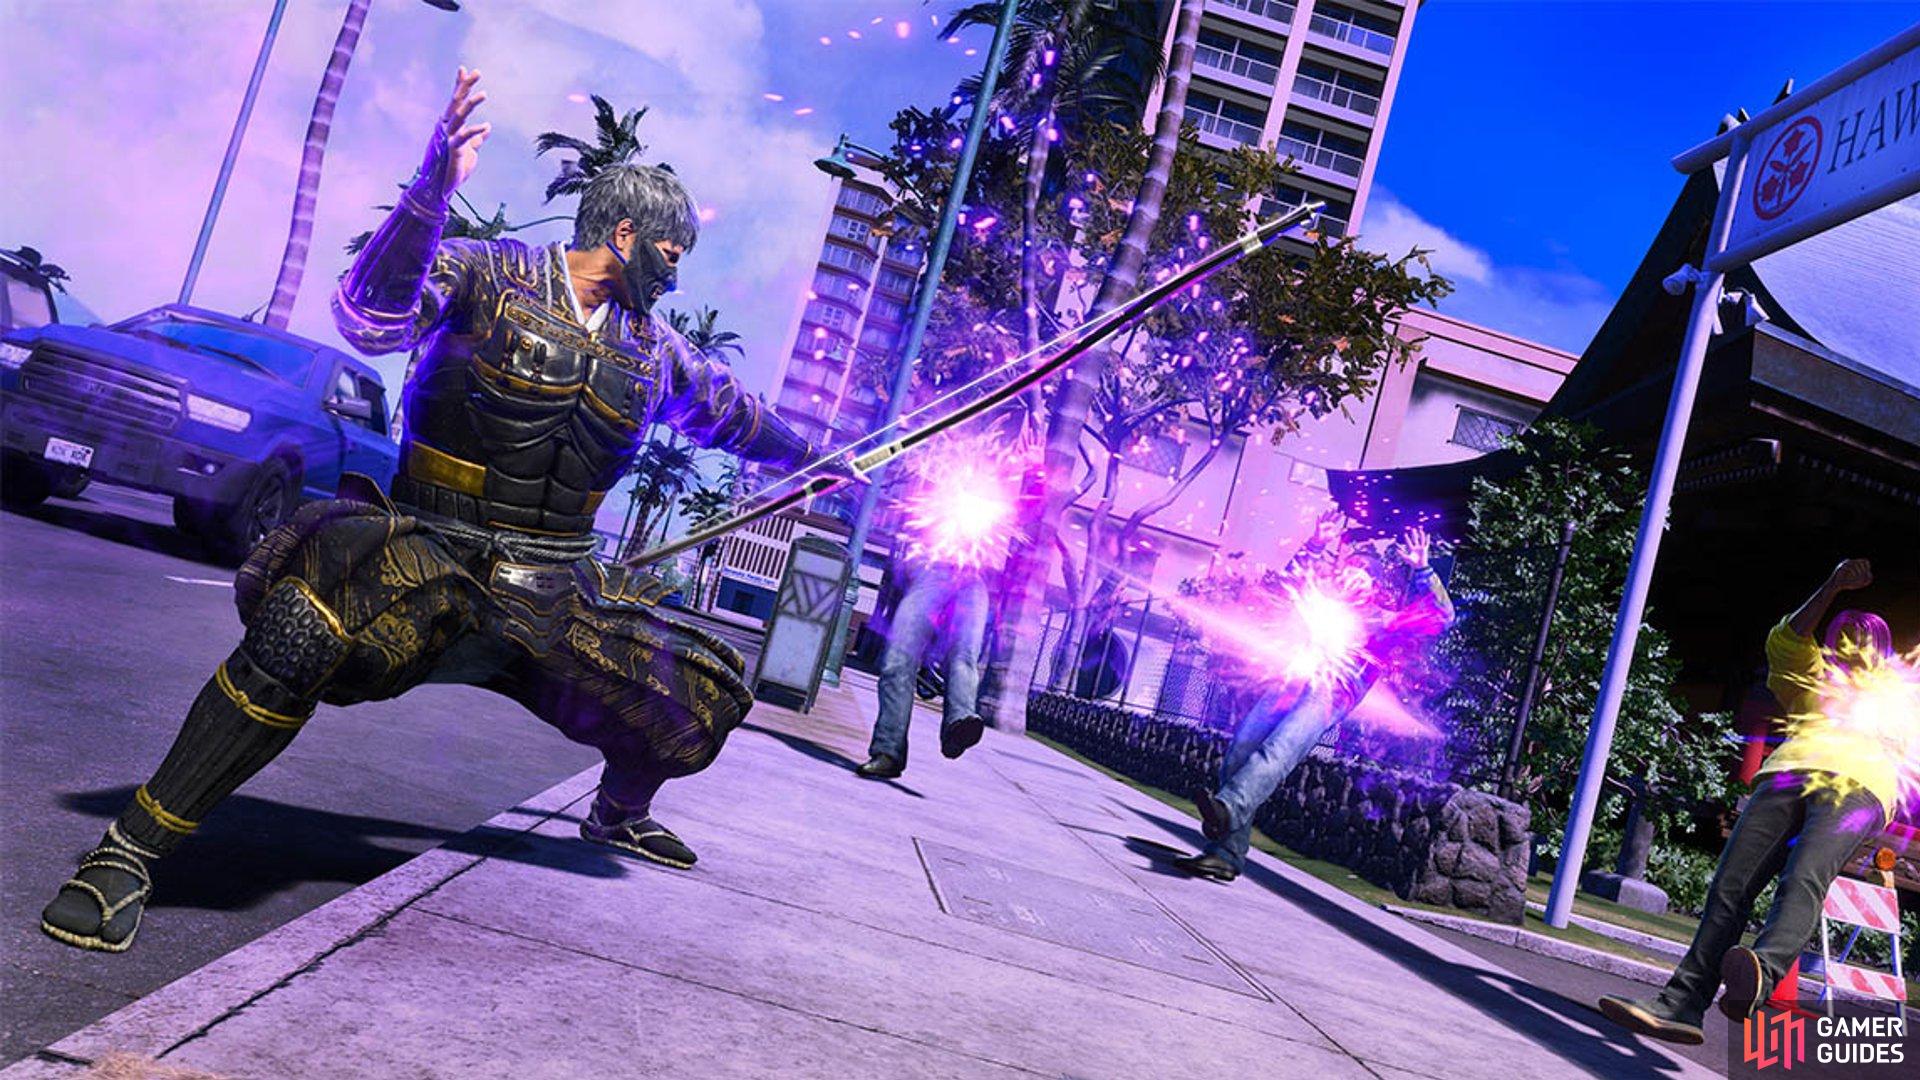 Able to deal bleed damage and weaken enemies’ defense, the Samurai is a great damage-dealing job for party members.